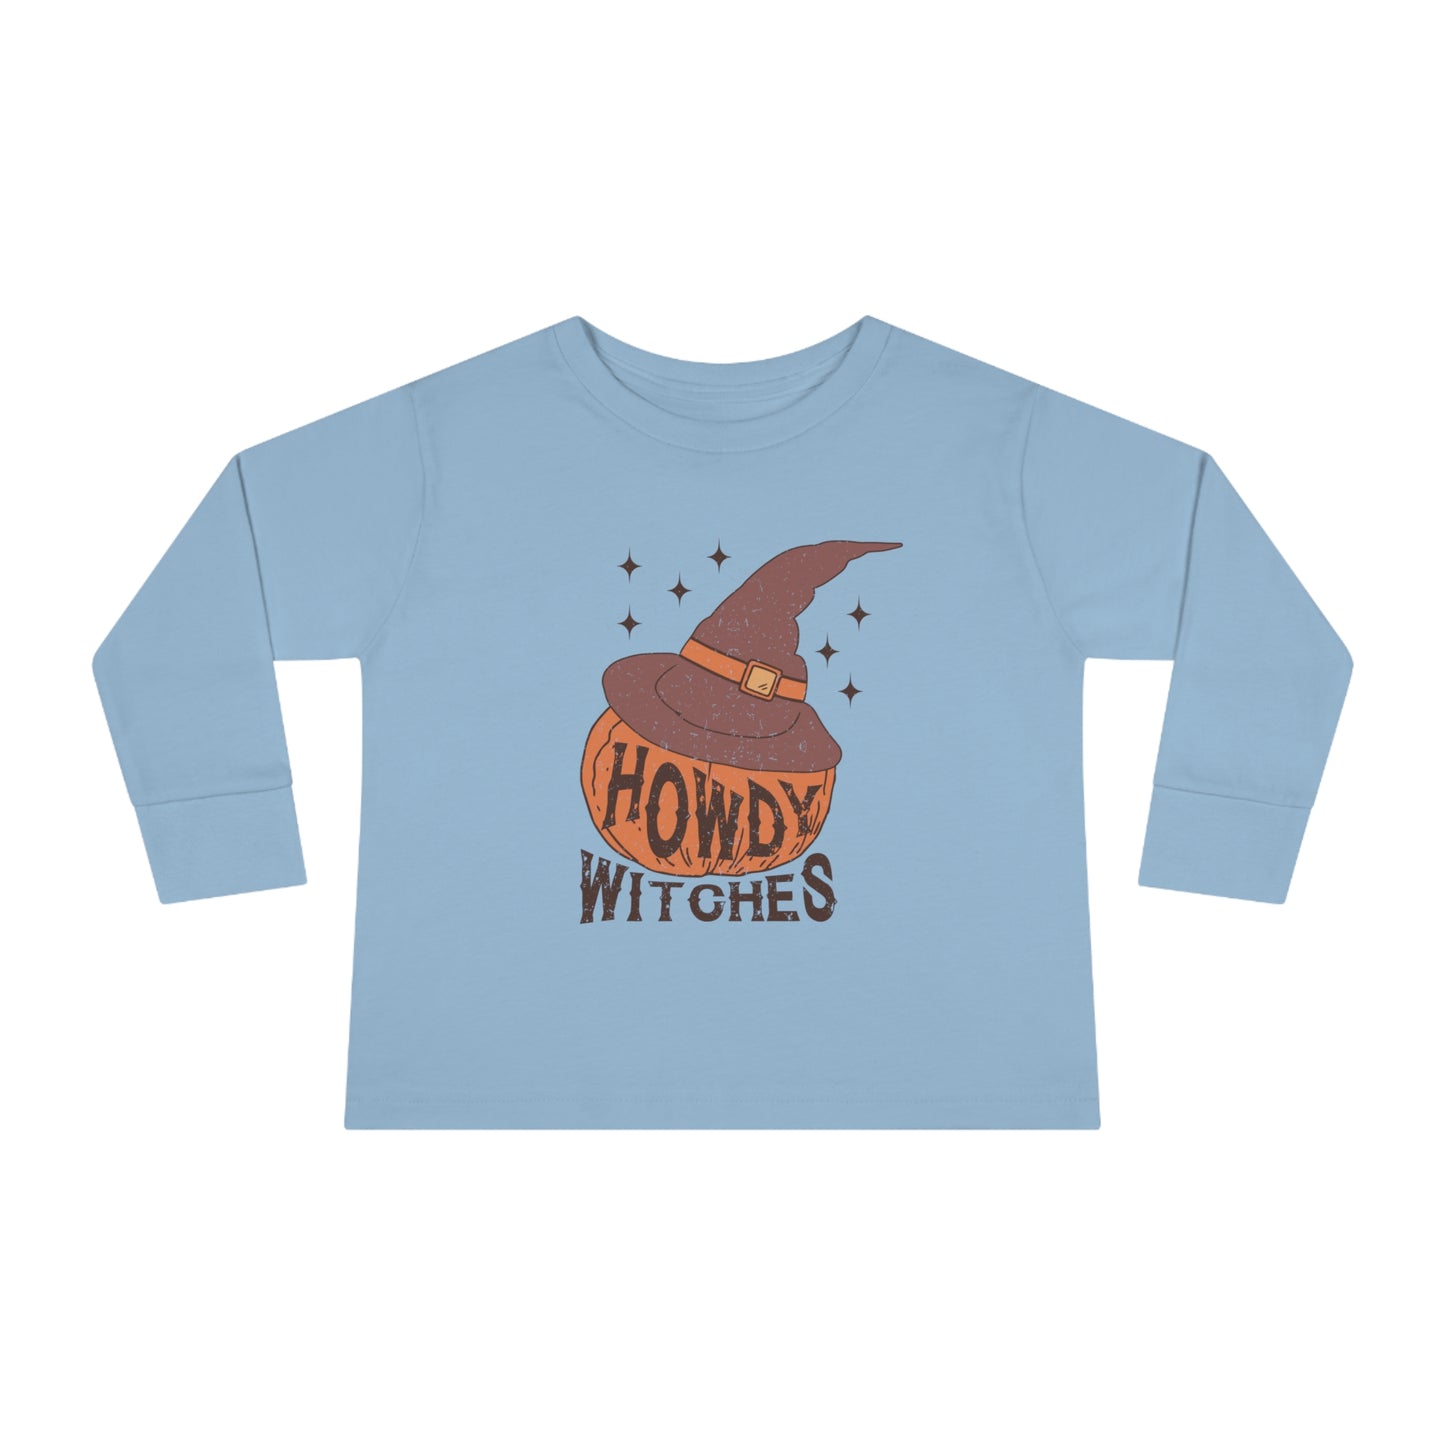 Howdy Witches Toddler Long Sleeve Tee